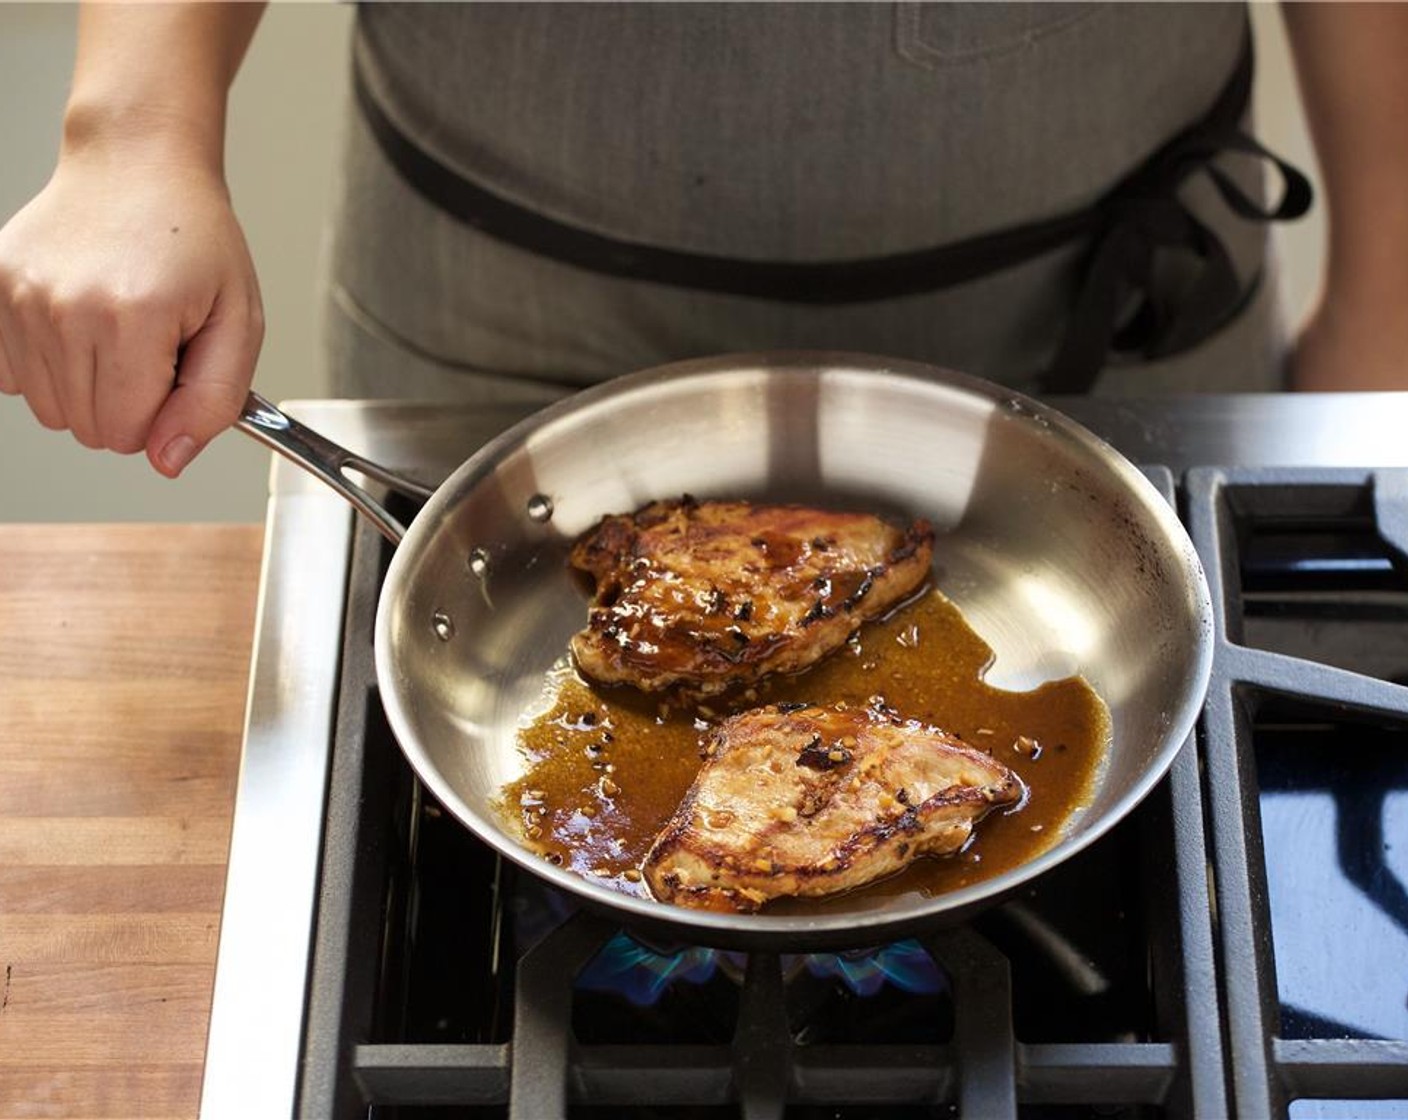 step 20 Add Extra-Virgin Olive Oil (1 Tbsp) to a medium saute pan over medium heat. When the oil is hot, add the chicken breast and cook for three minutes on each side or until cooked through.